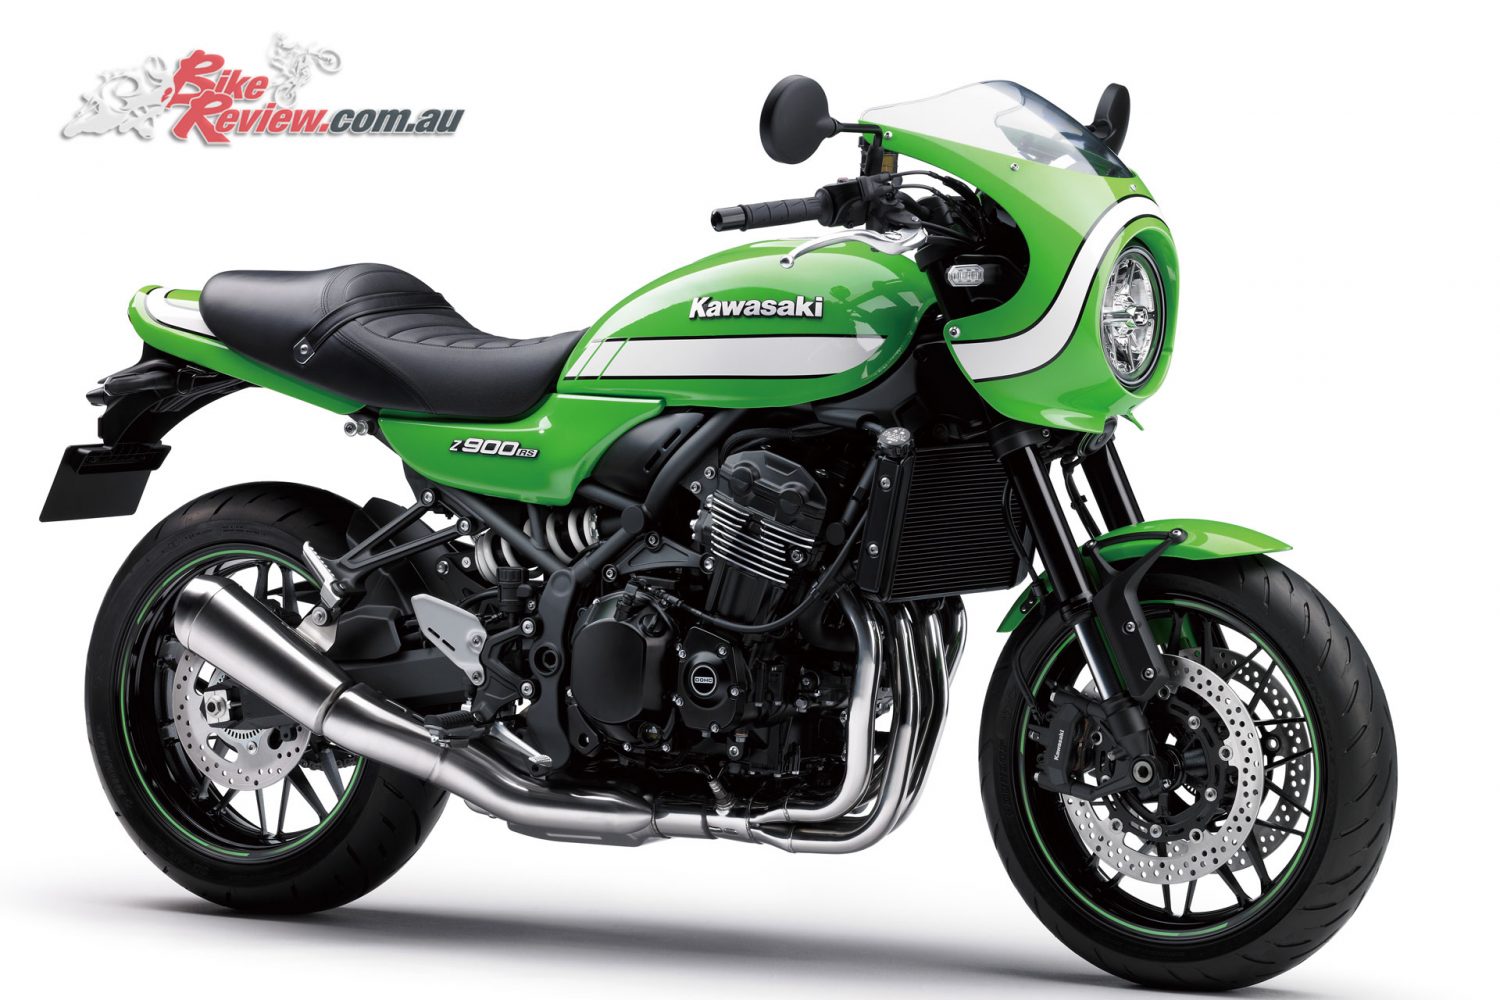 The Z900RS Cafe features the same core ergonomics as the standard RS, but includes dropped 'racer style 'bars